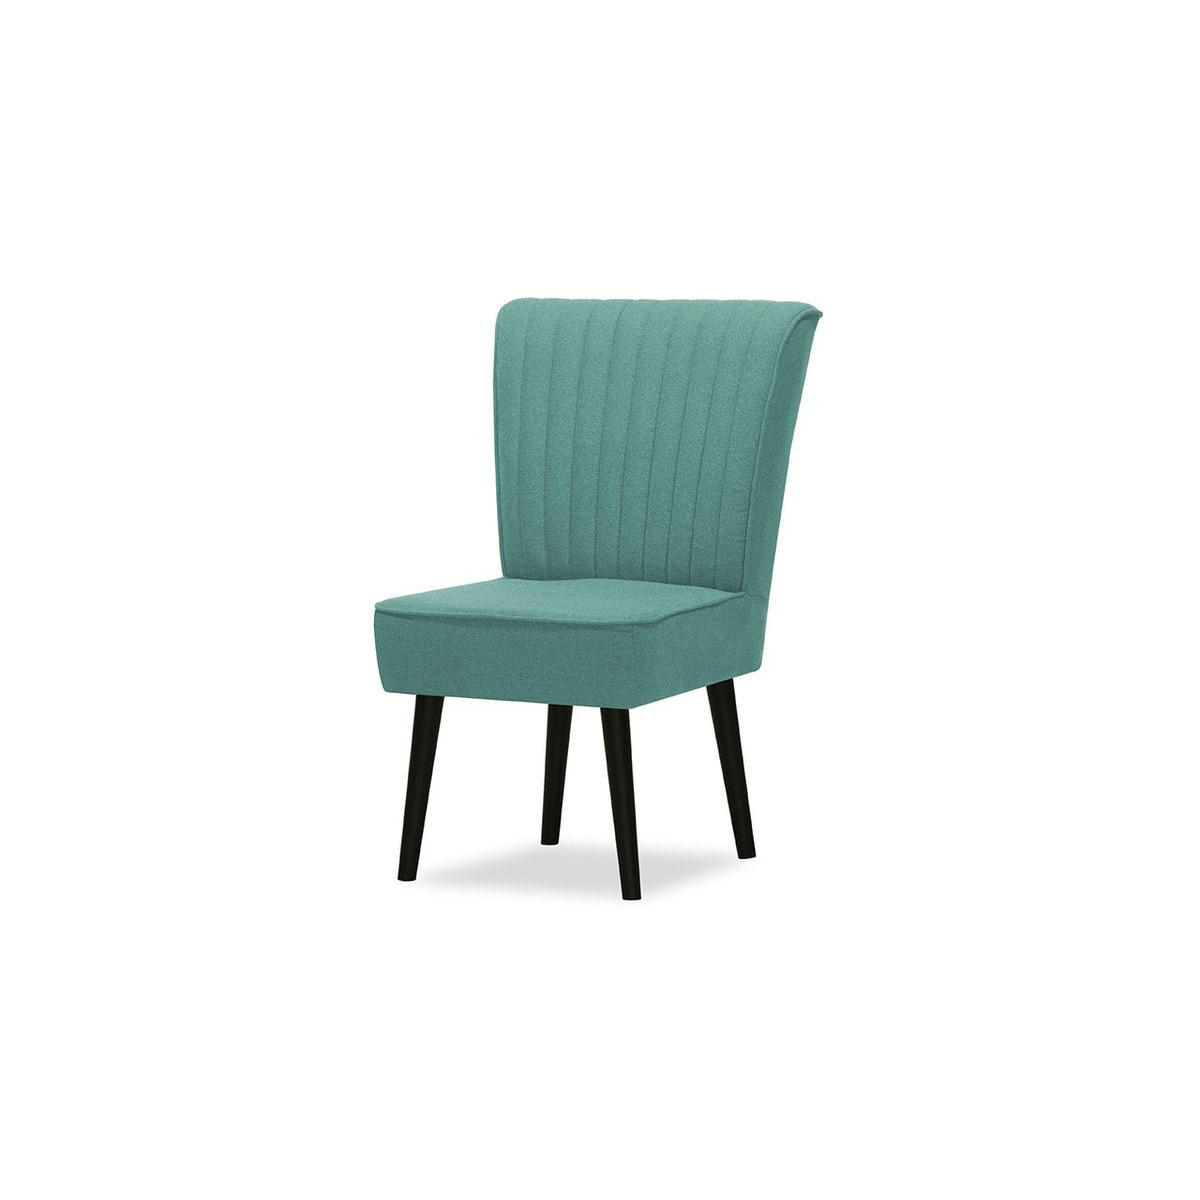 Tagen Dining Chair, navy blue, Leg colour: white - image 1